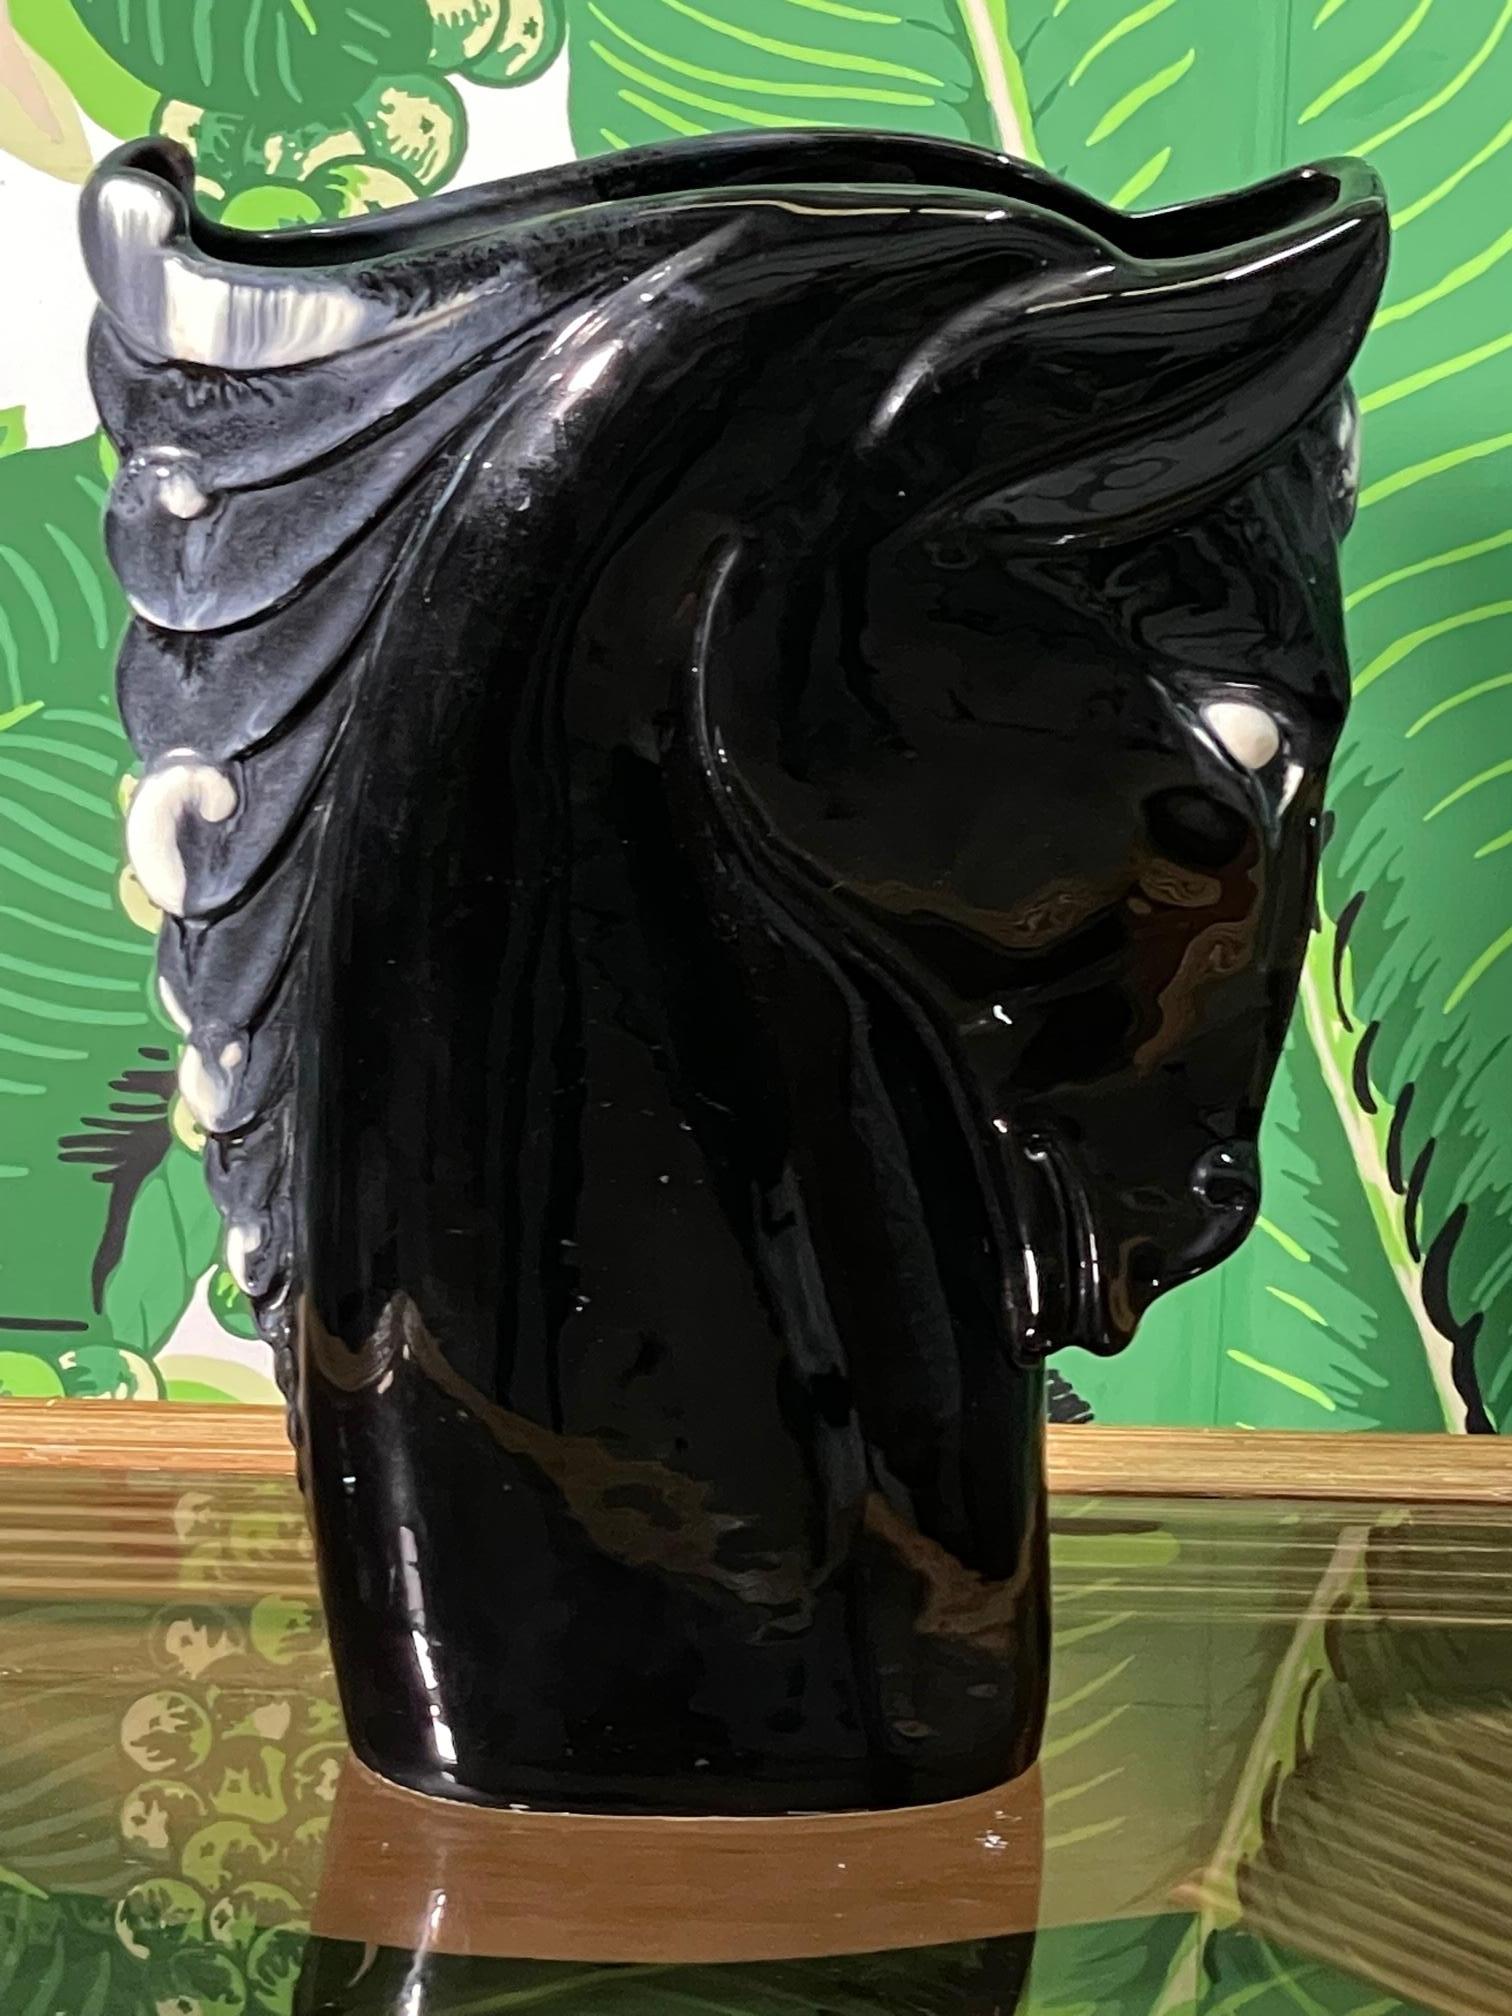 Modern ceramic horse head vase by Royal Hickman in gloss black finish with light accents. Good condition with minor imperfections consistent with age (see photos).
 
 